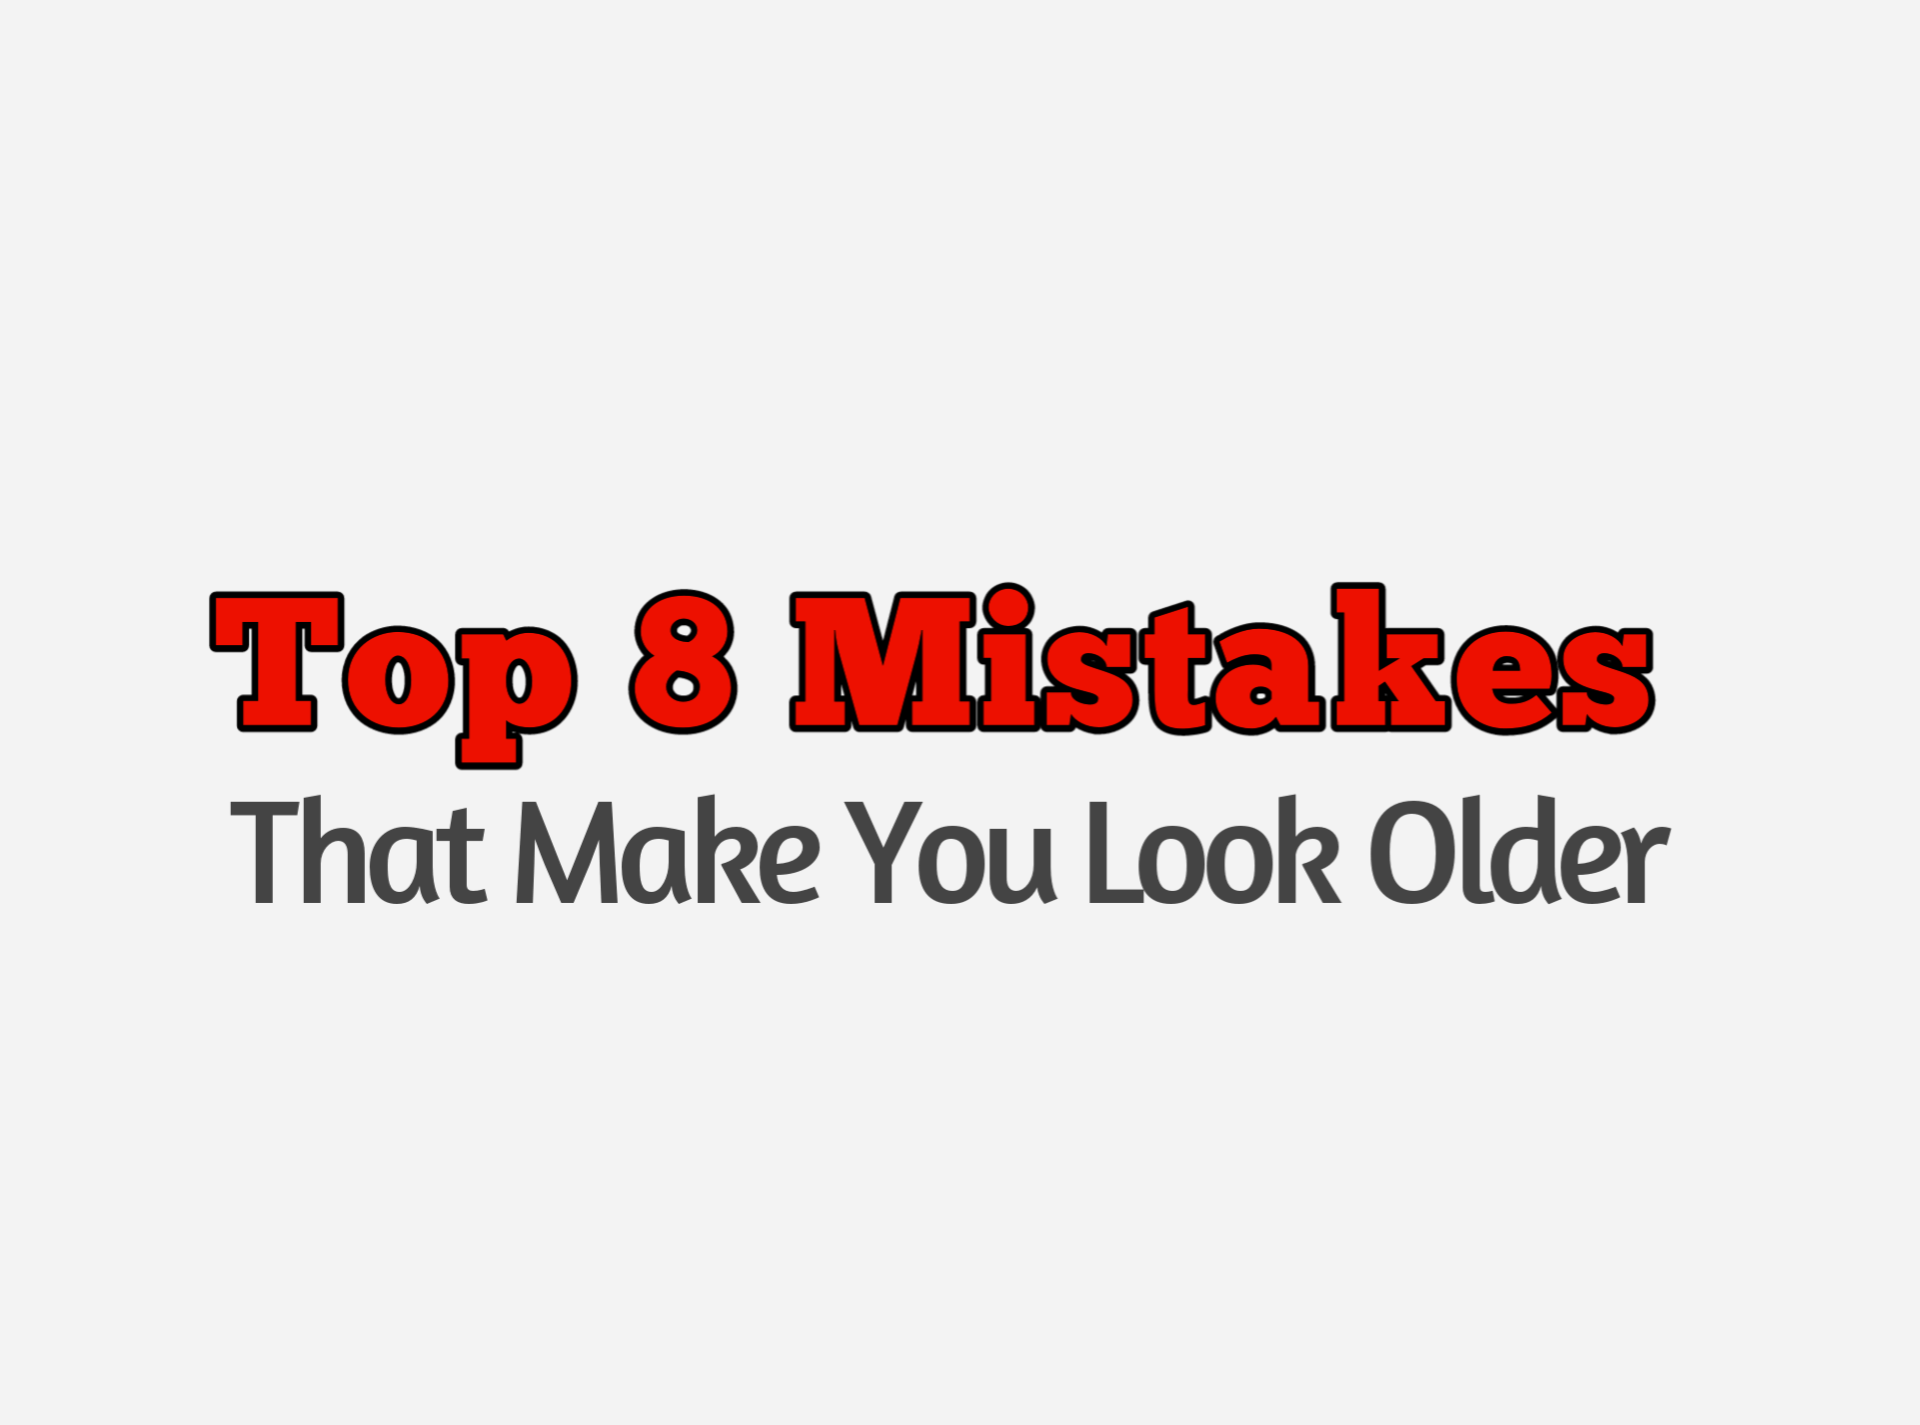 Mistakes that make you look older